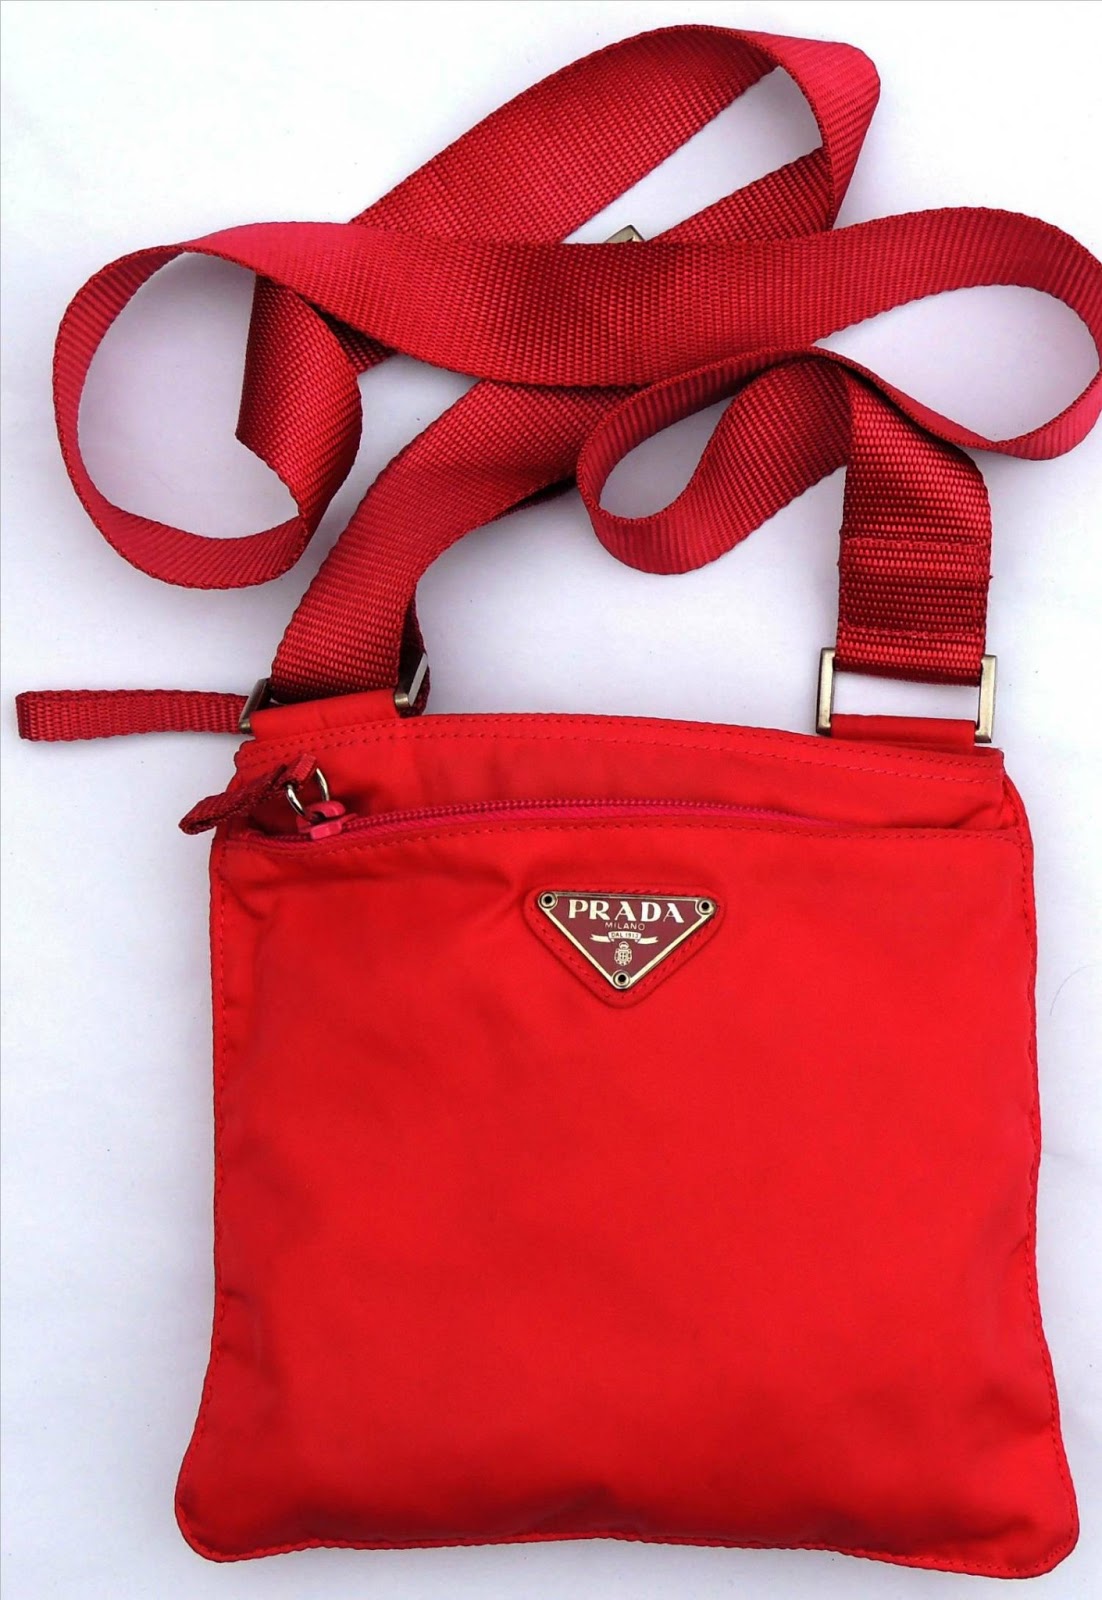 Authentic Prada Sling Bag Price | Confederated Tribes of the Umatilla Indian Reservation